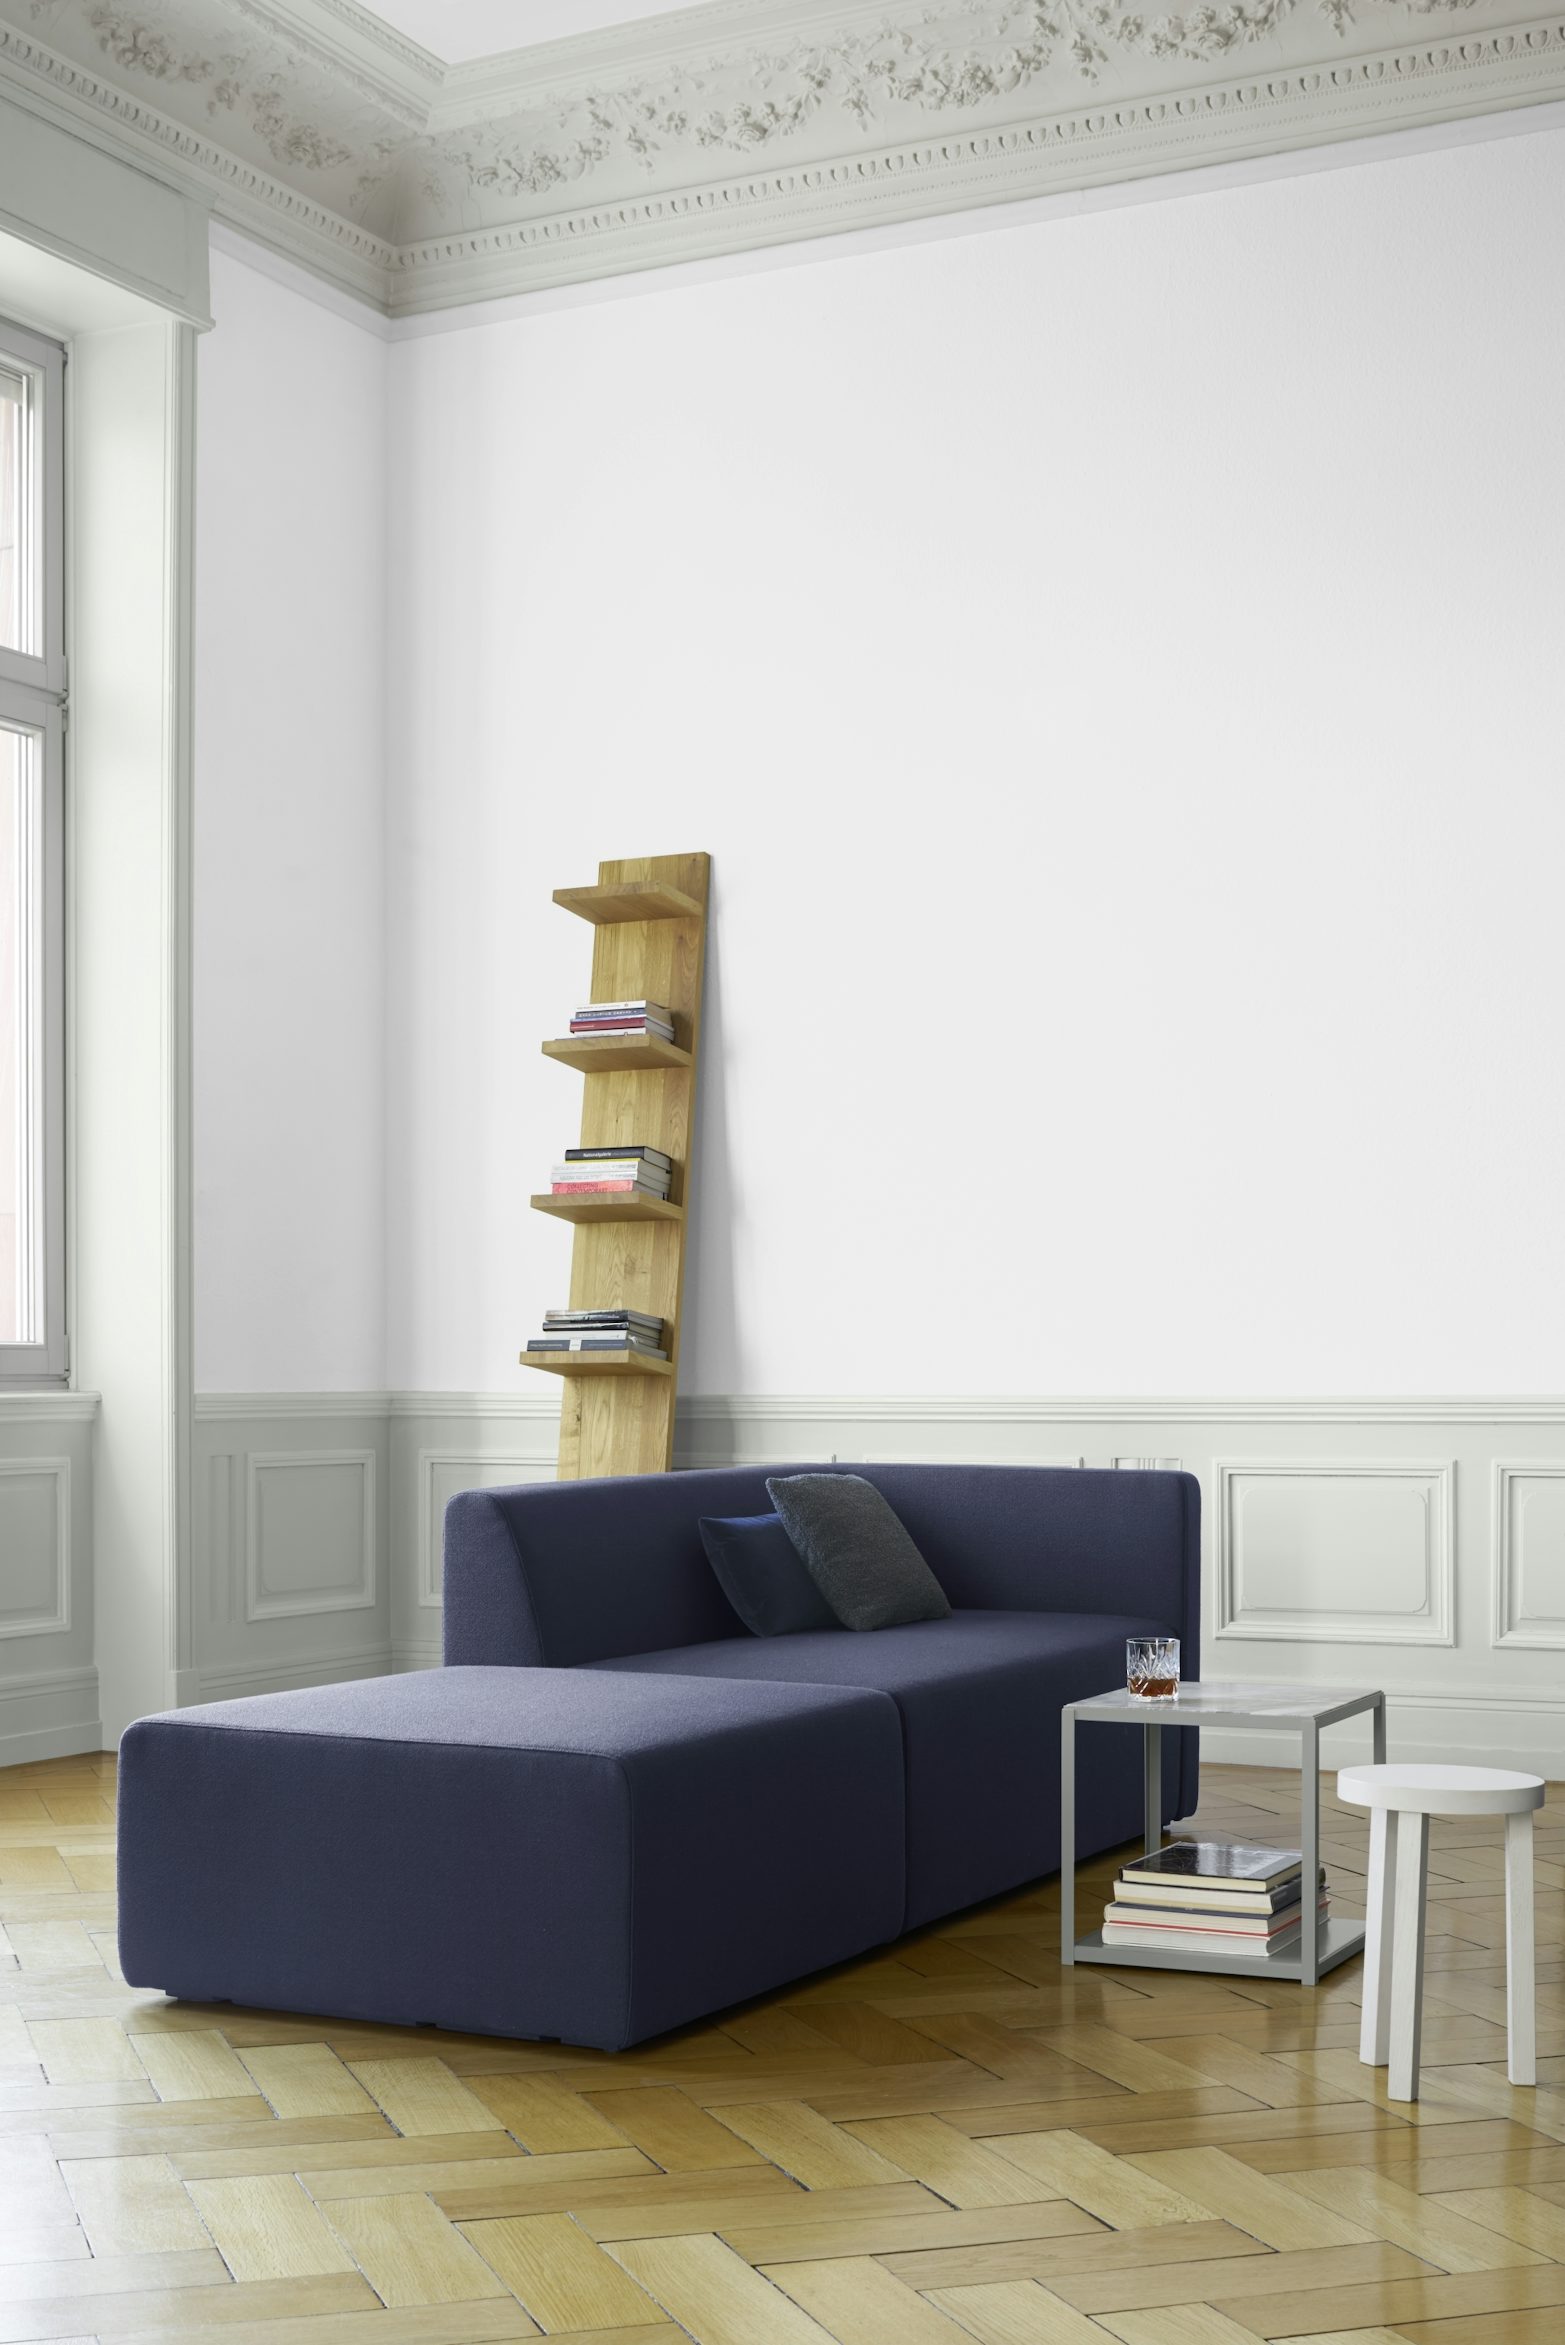 e15 mate shelf with kerman sofa and forty forty table